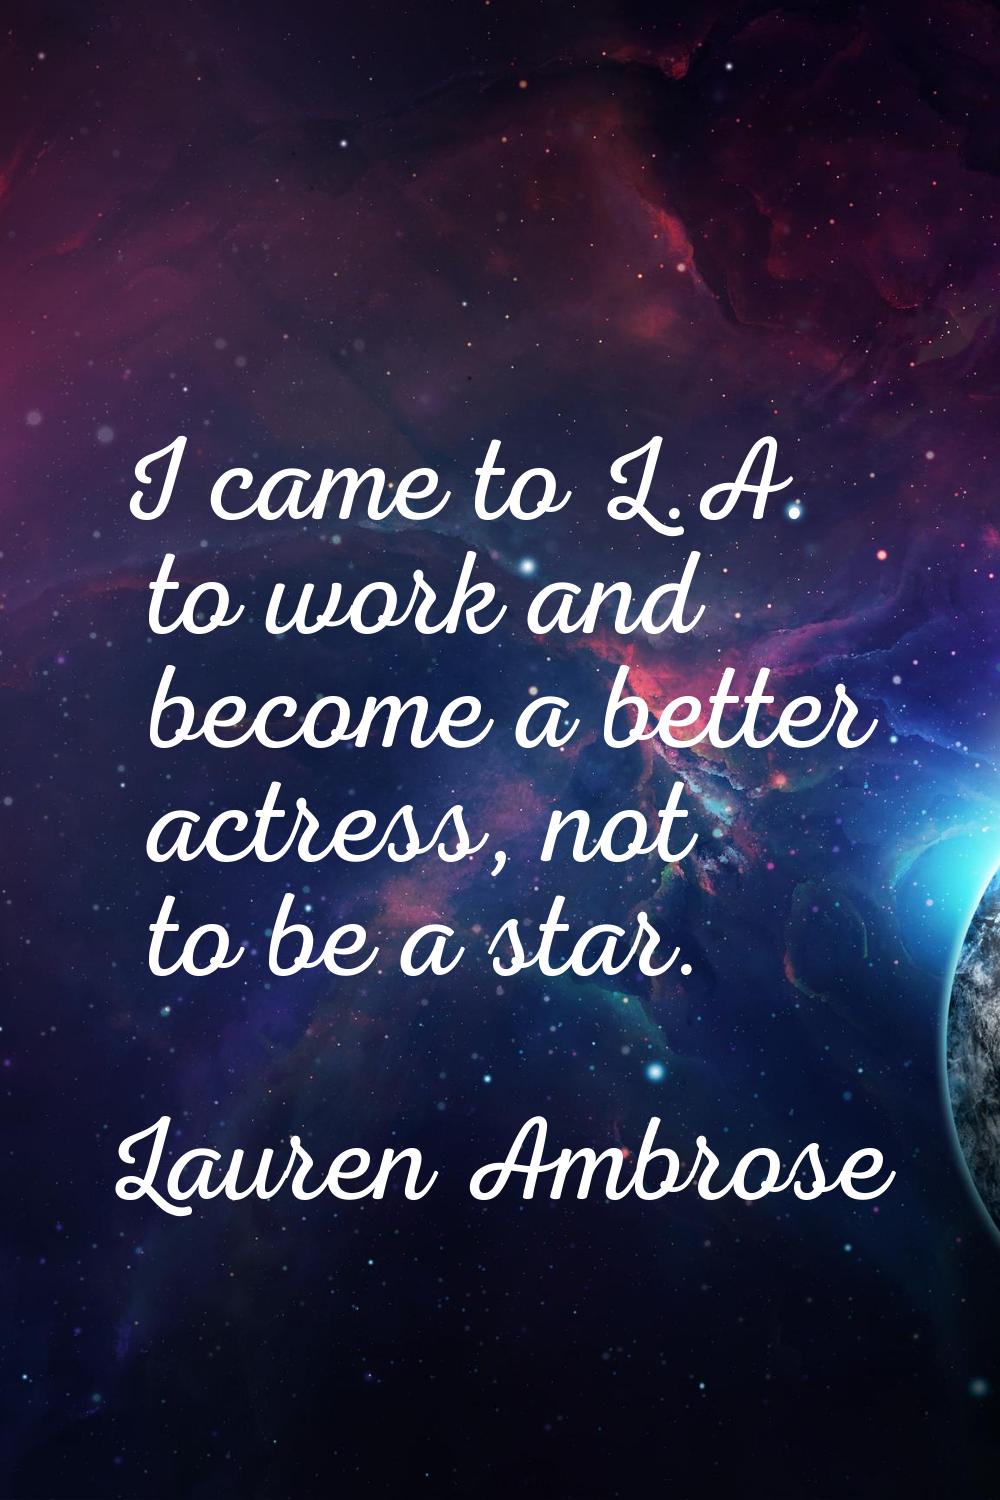 I came to L.A. to work and become a better actress, not to be a star.